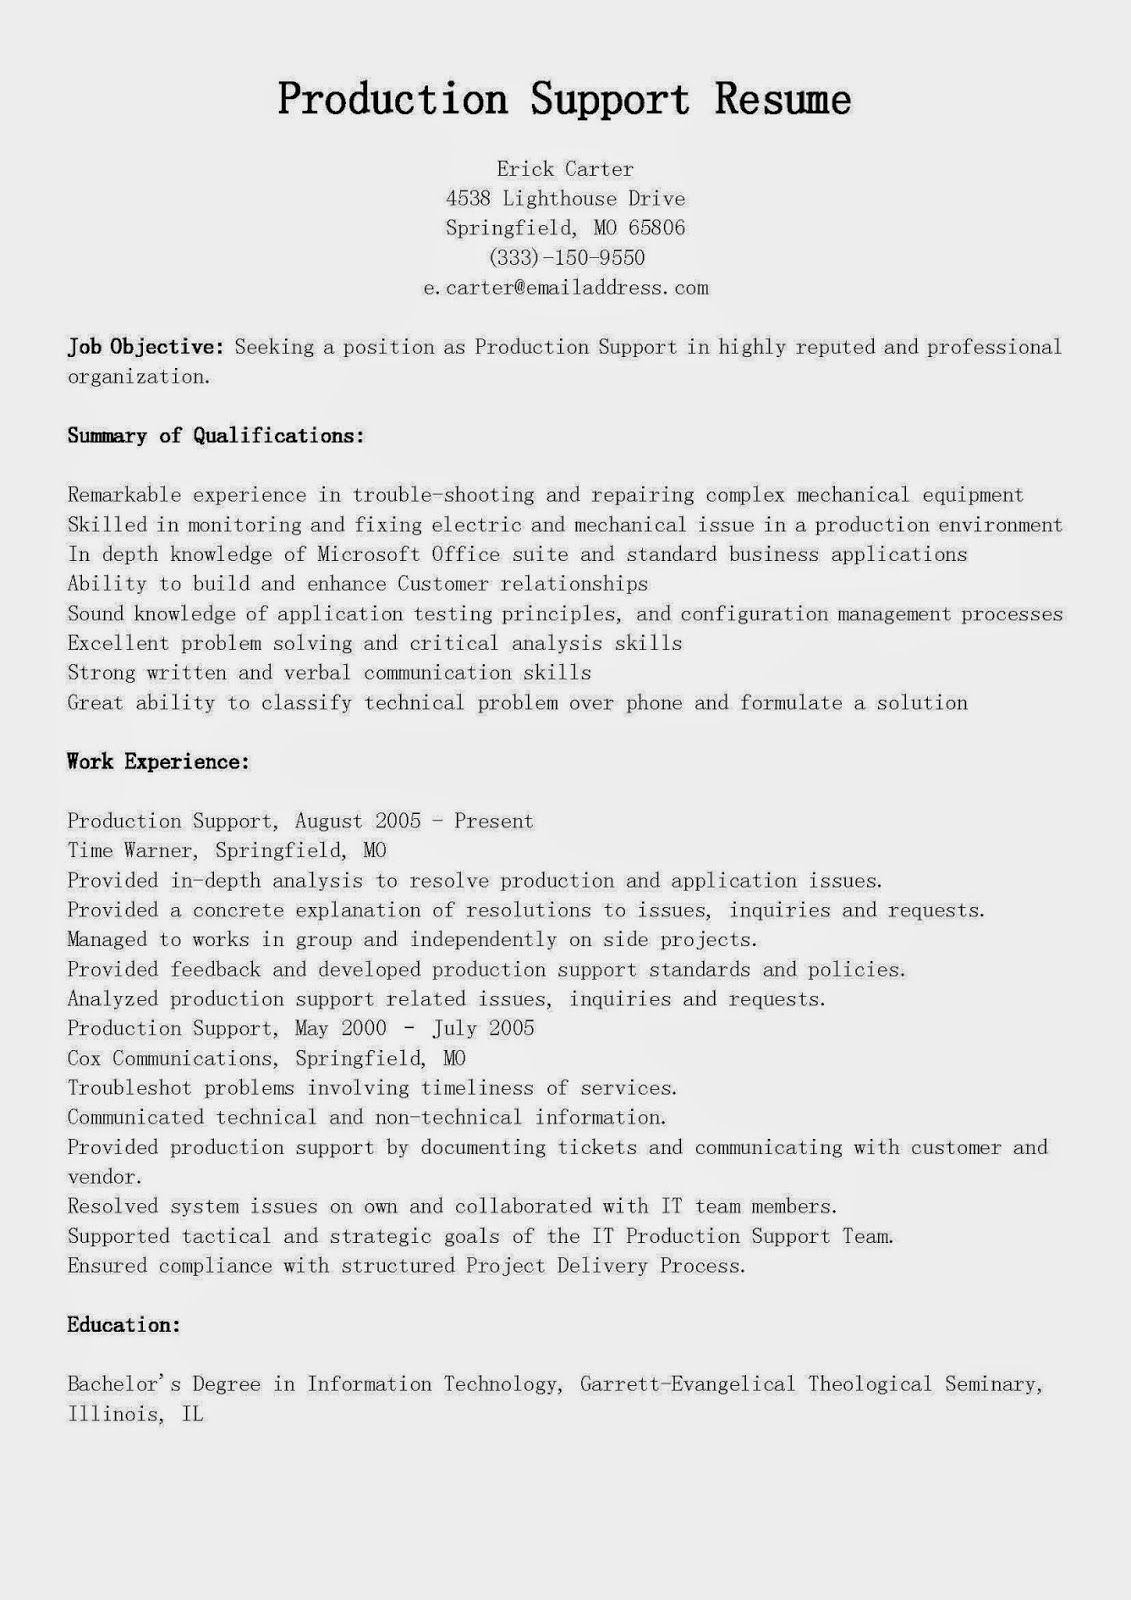 Sample Resume for Production Support Engineer Production Support Resume Sample Resume, Supportive, Best Resume